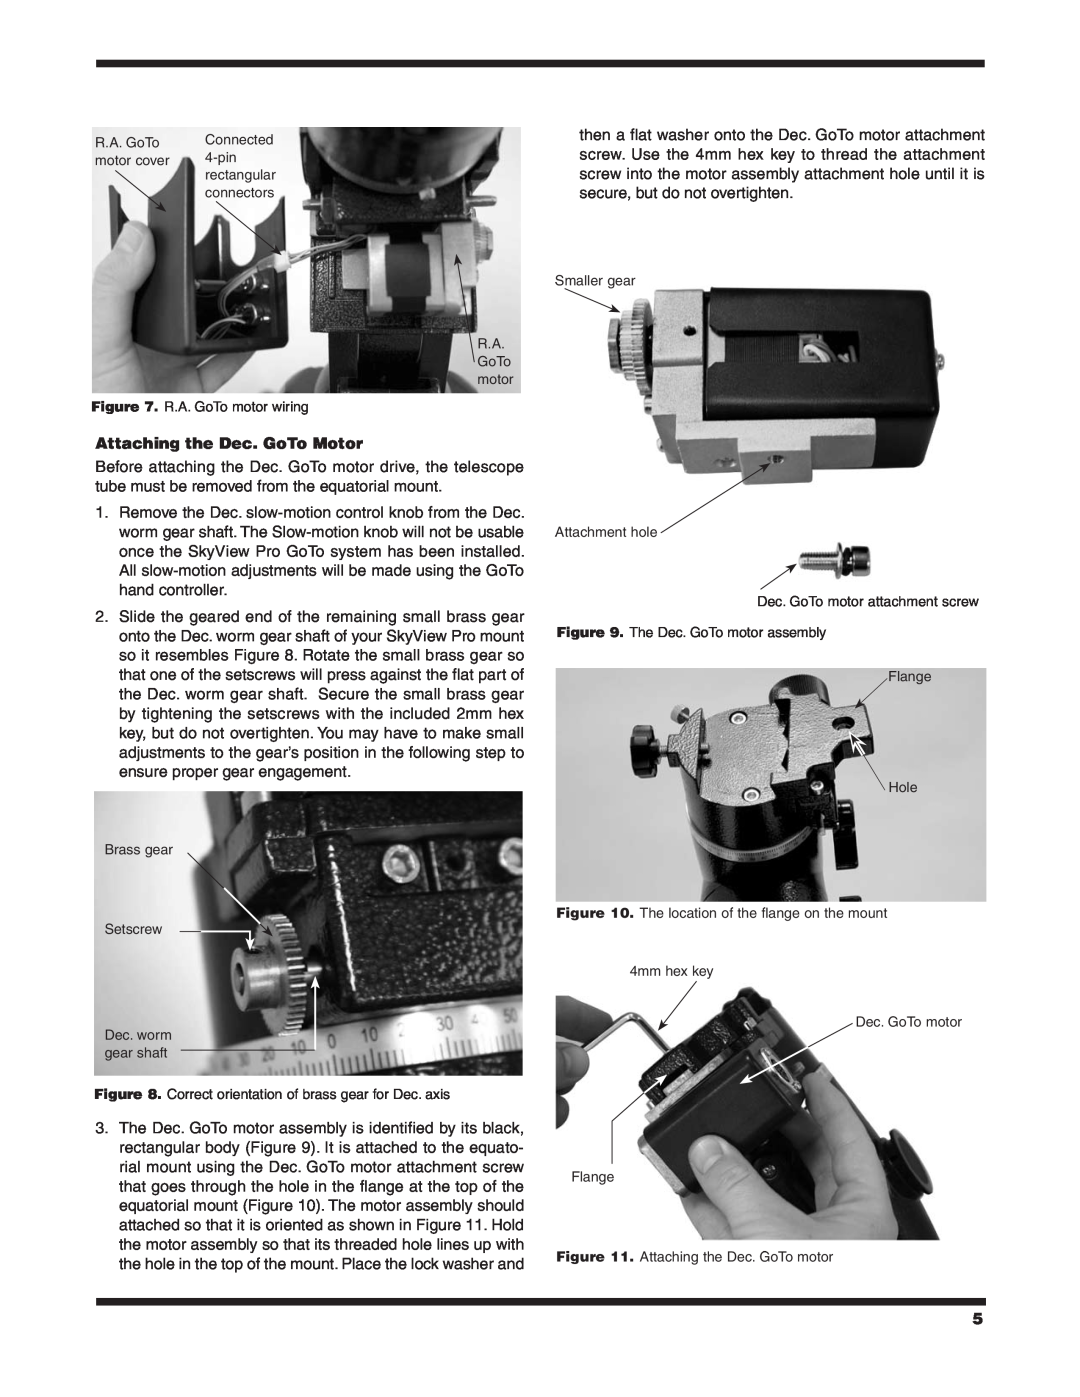 Orion 7817 instruction manual Attaching the Dec. GoTo Motor 